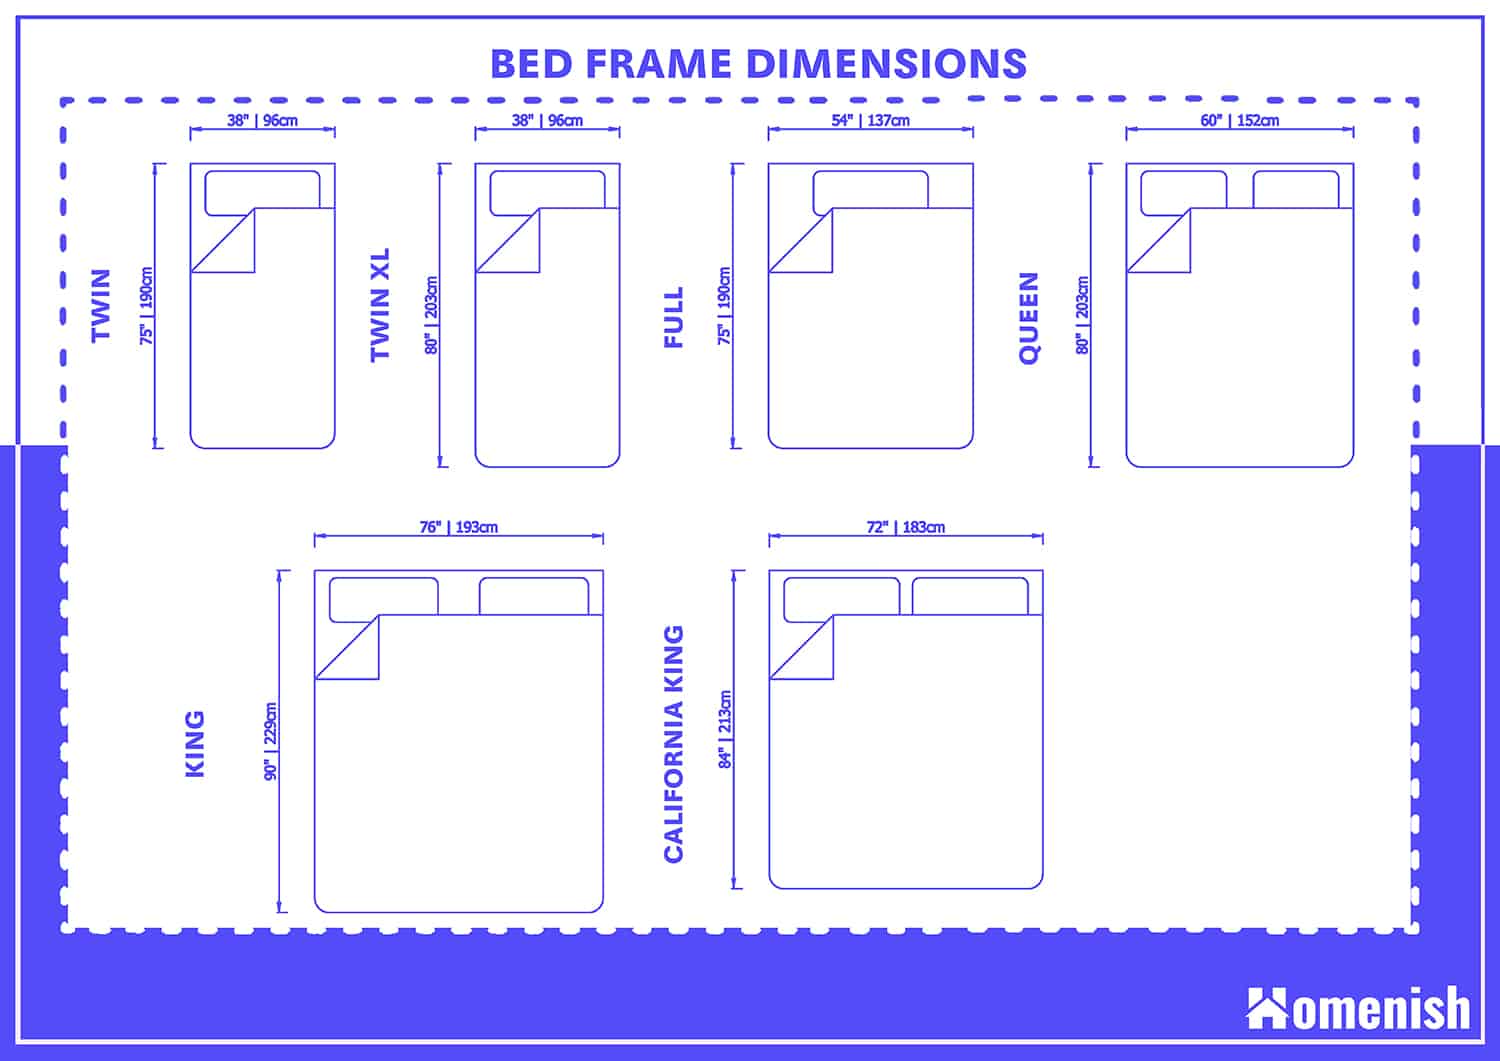 full mattress bed frame dimensions